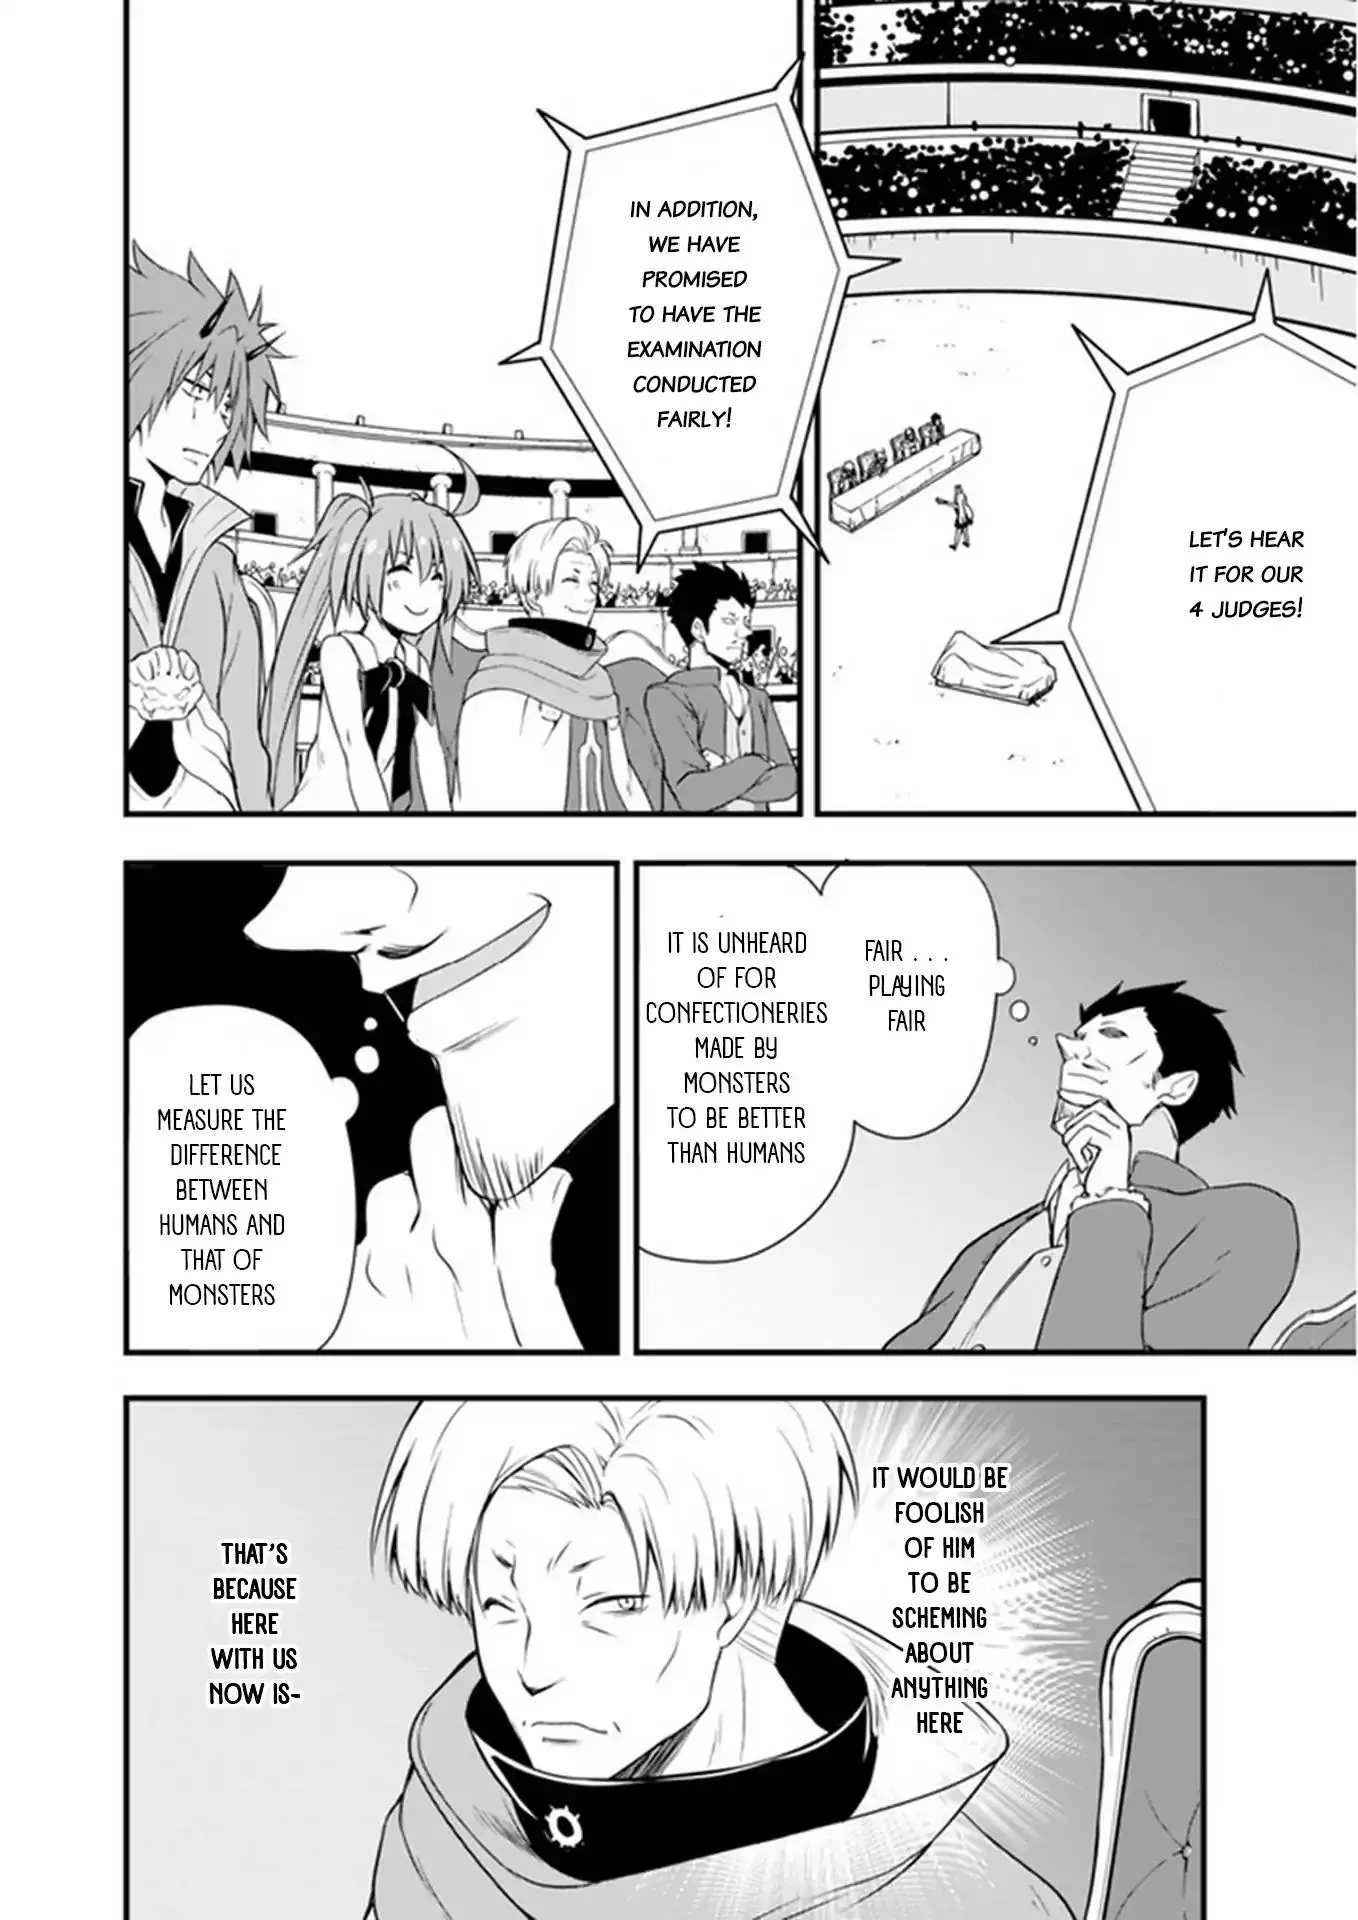 Tensei Shitara Slime Datta Ken: The Ways of Strolling in the Demon Country - 16 page 17